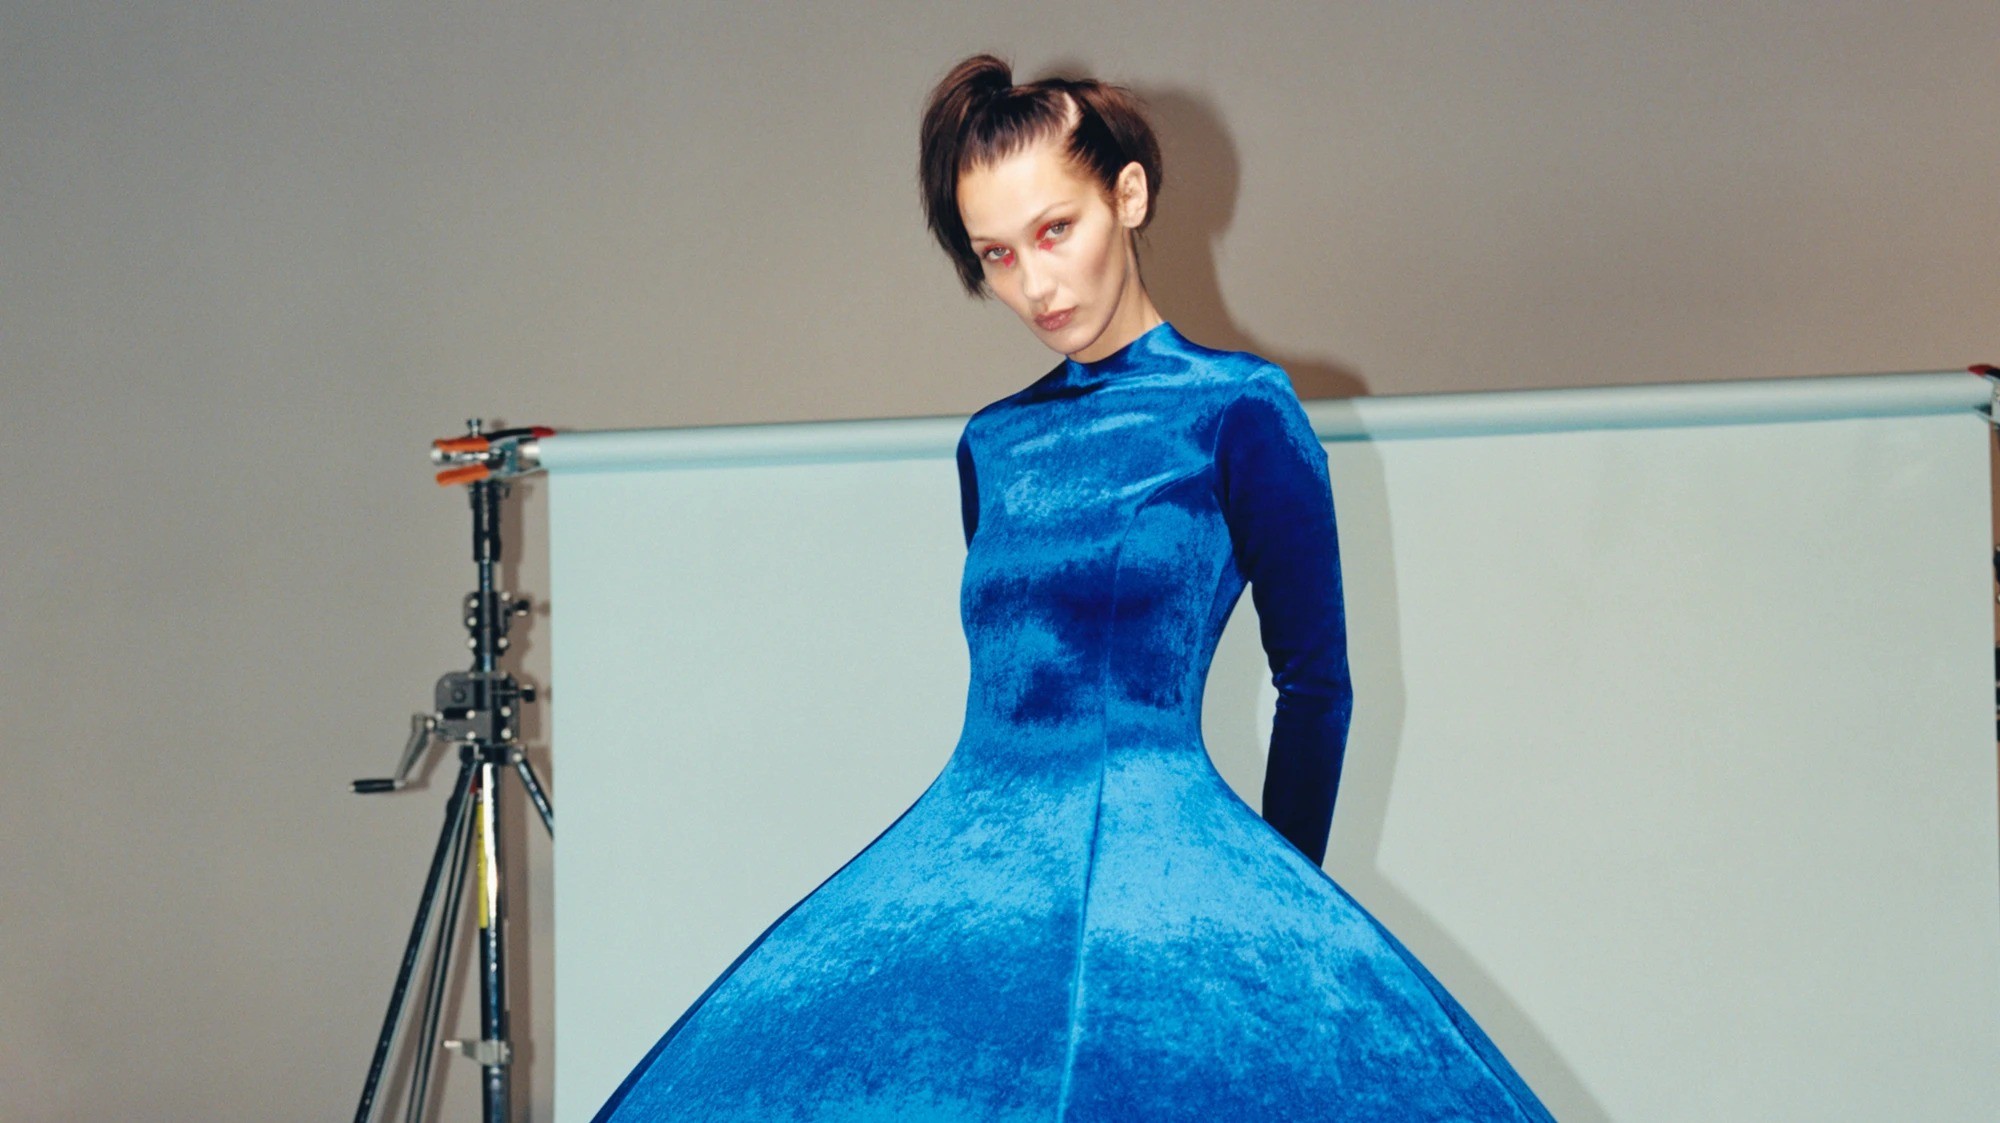 Balenciaga returns to haute couture: what can we expect?